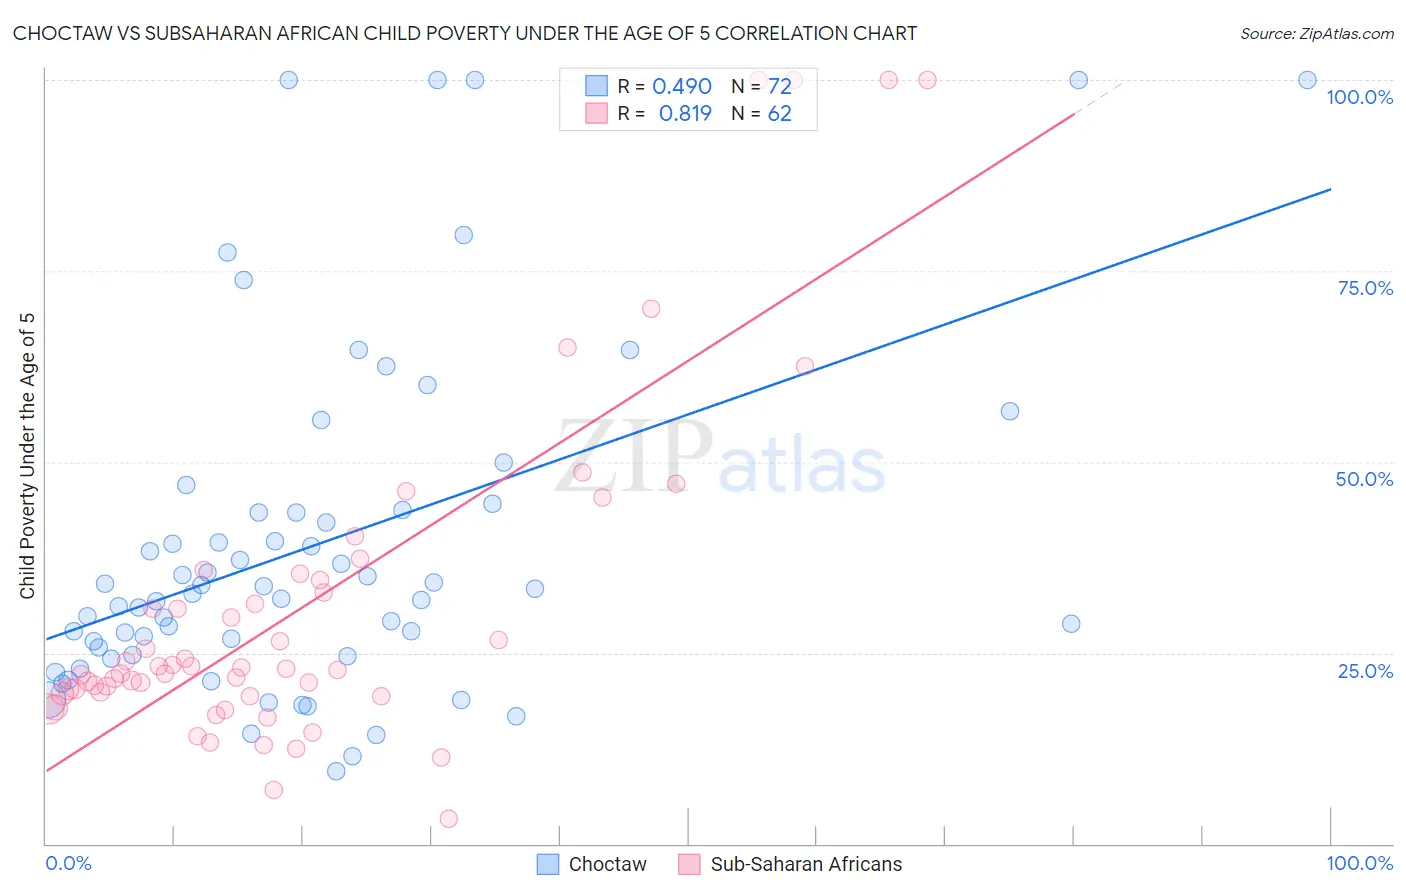 Choctaw vs Subsaharan African Child Poverty Under the Age of 5